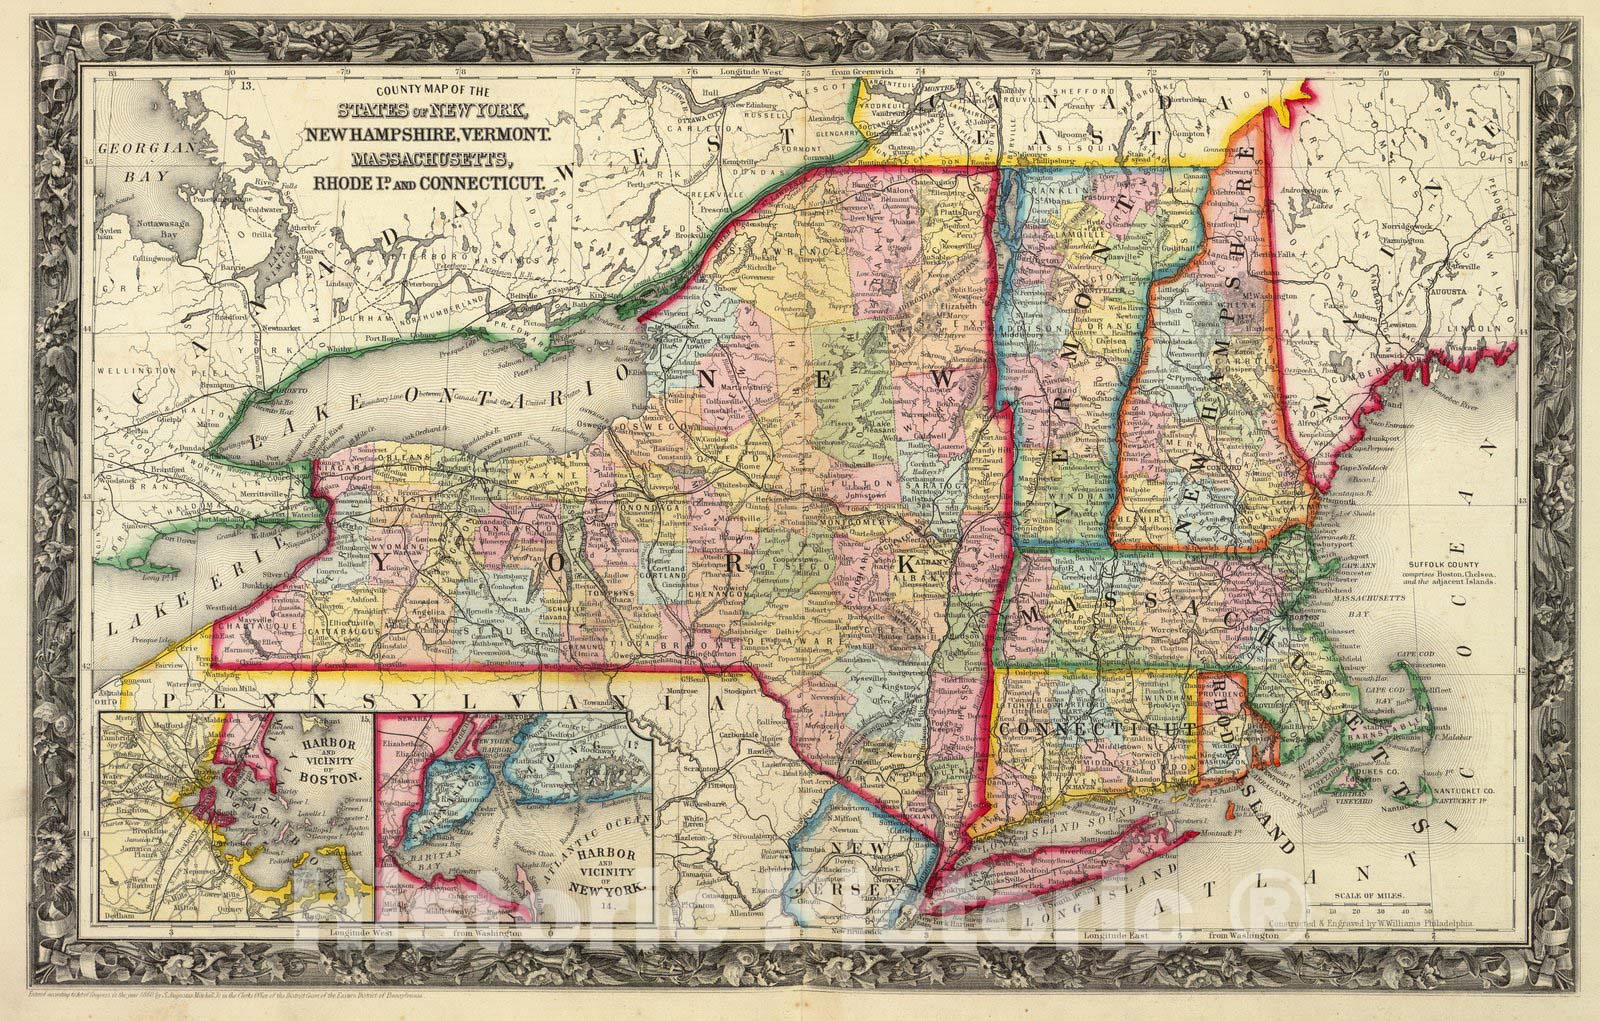 Historic Map - County Map of the States of New York, New Hampshire, Vermont, Massachusetts, Rhode Id. And Connecticutt, 1865, Samuel Augustus Mitchell Jr. v3